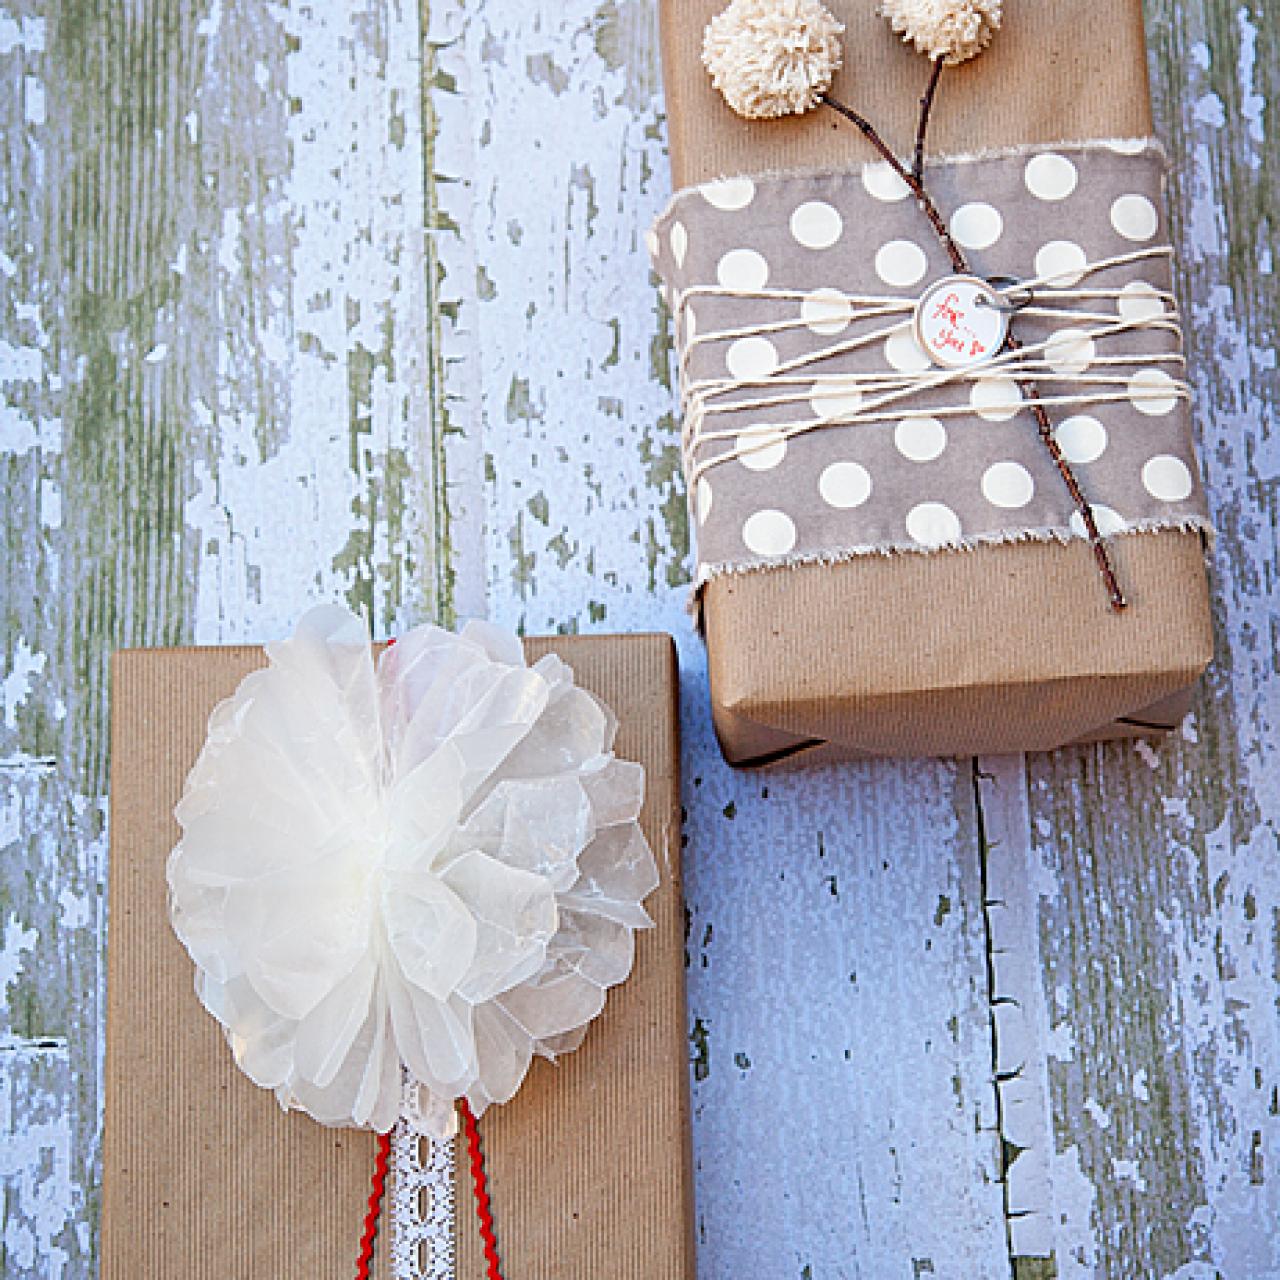 10 Clever Zero Waste Gift Wrapping Ideas - Annmarie Gianni